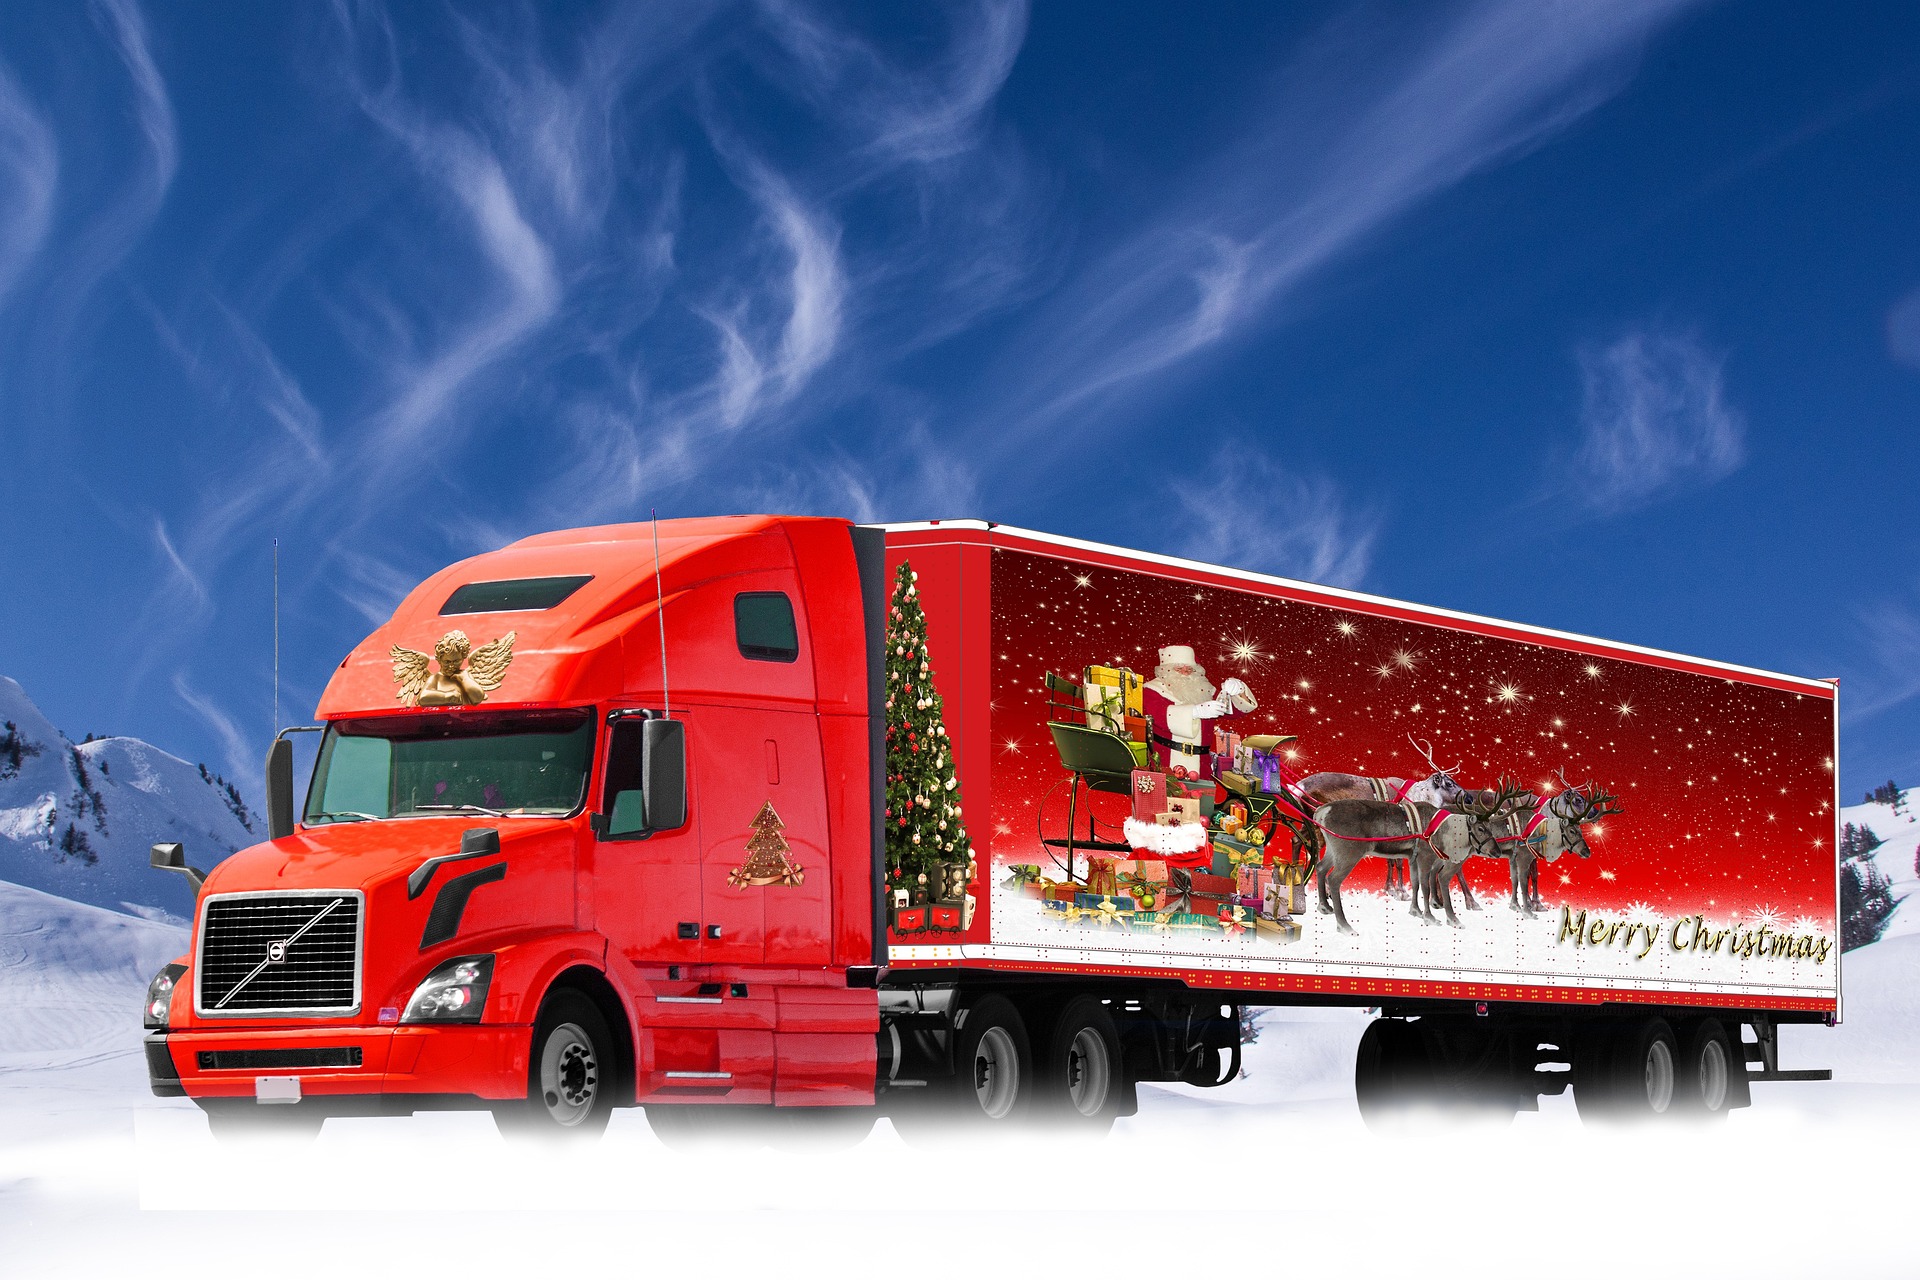 Texas holiday truck accident lawyer